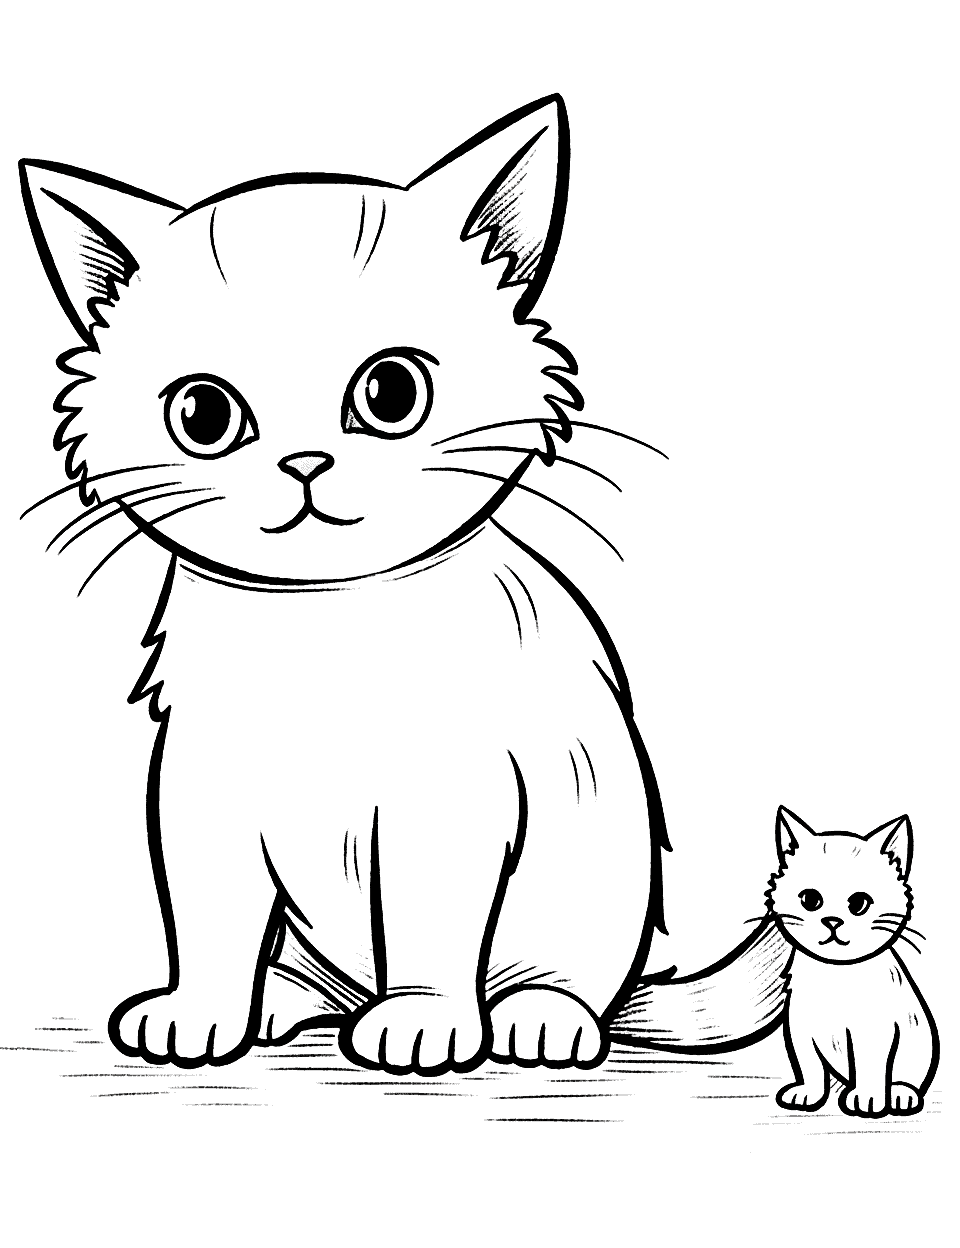 Baby Cat's First Steps Cat Coloring Page - A baby cat taking its first tentative steps, with its mother watching protectively.